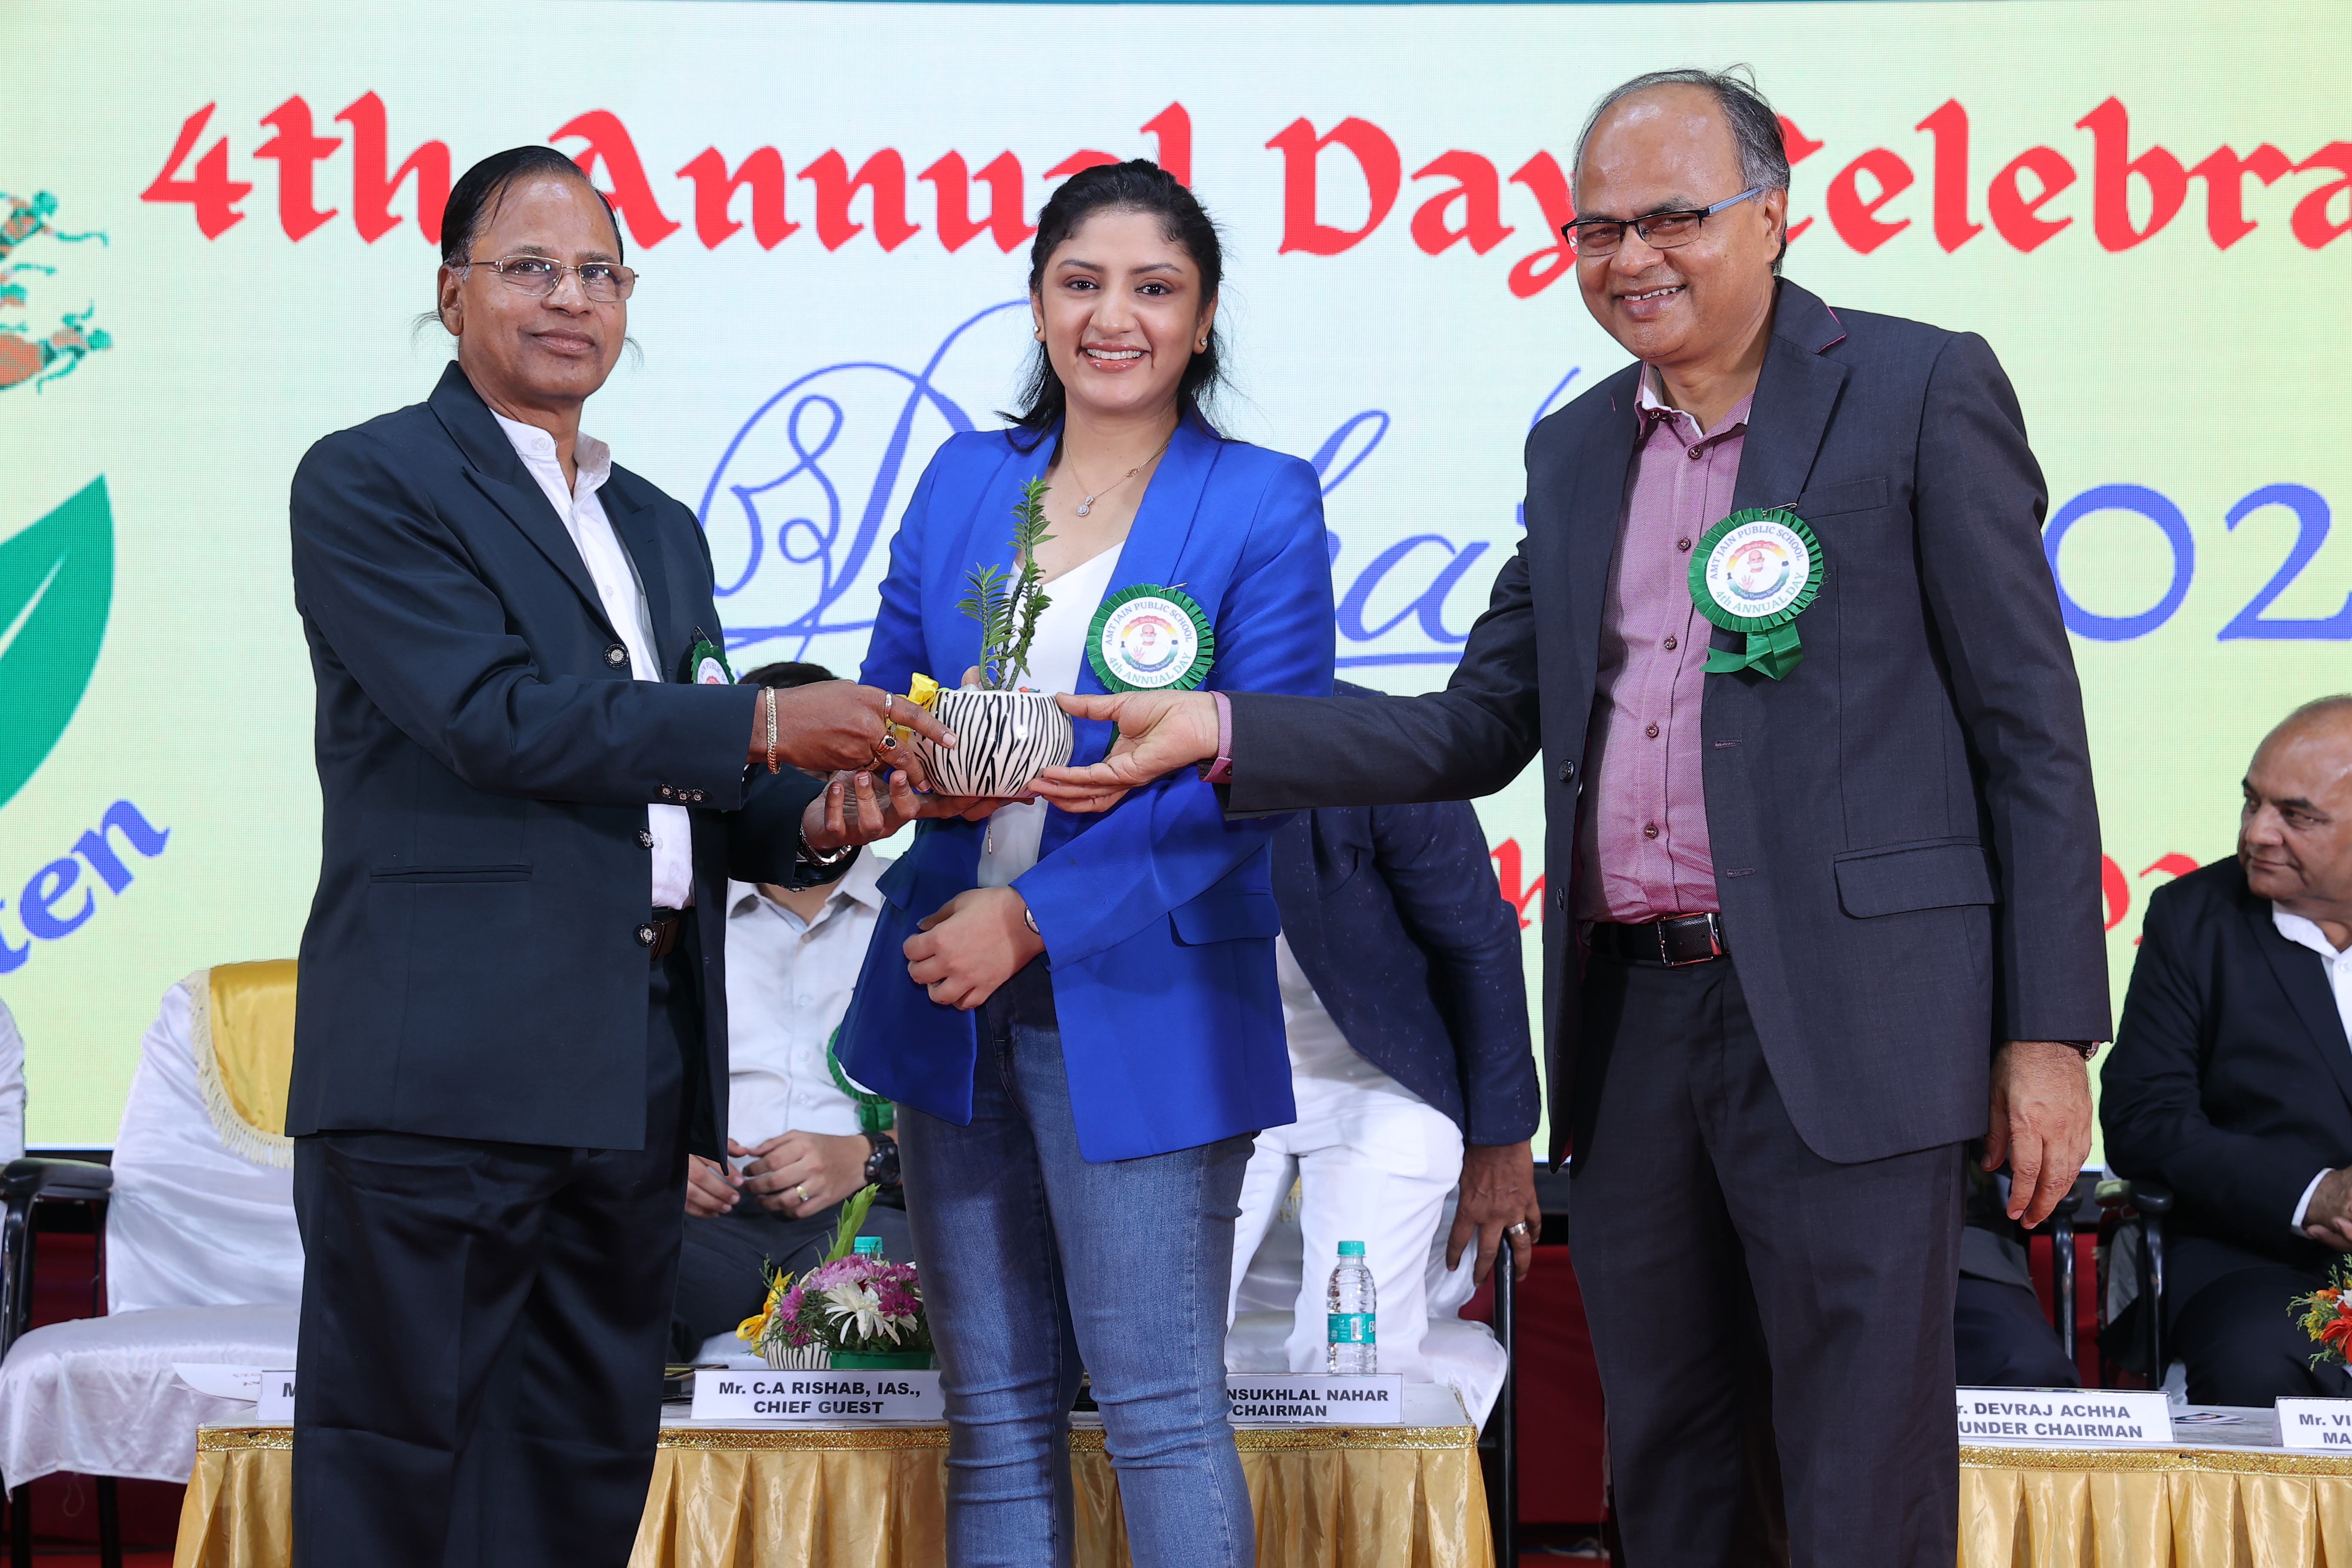 4th ANNUAL DAY CELEBRATIONS